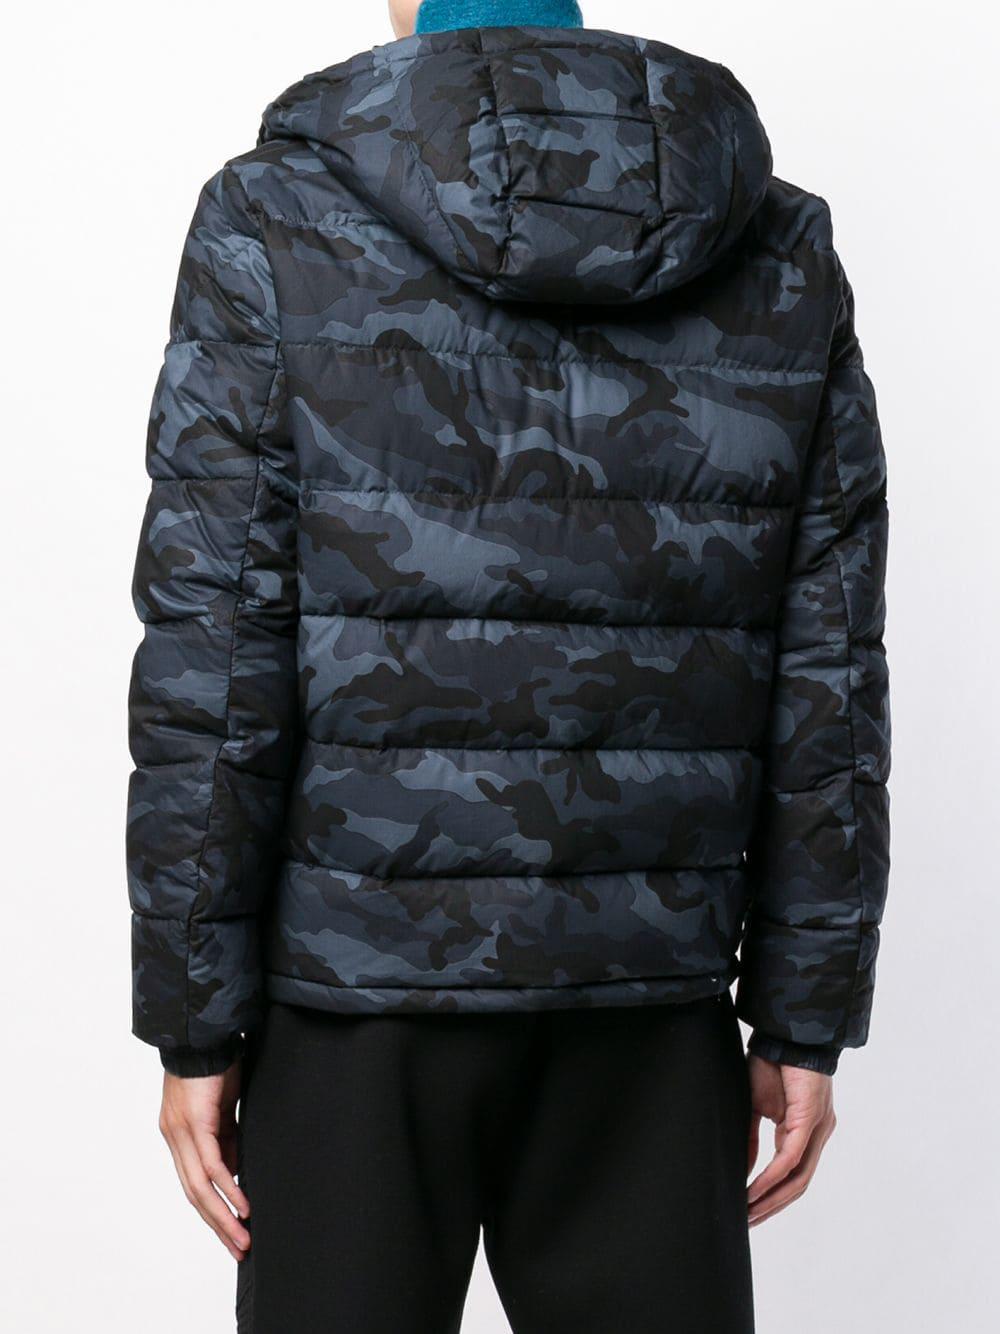 Moncler Synthetic Camouflage Print Puffer Jacket in Blue for Men - Lyst